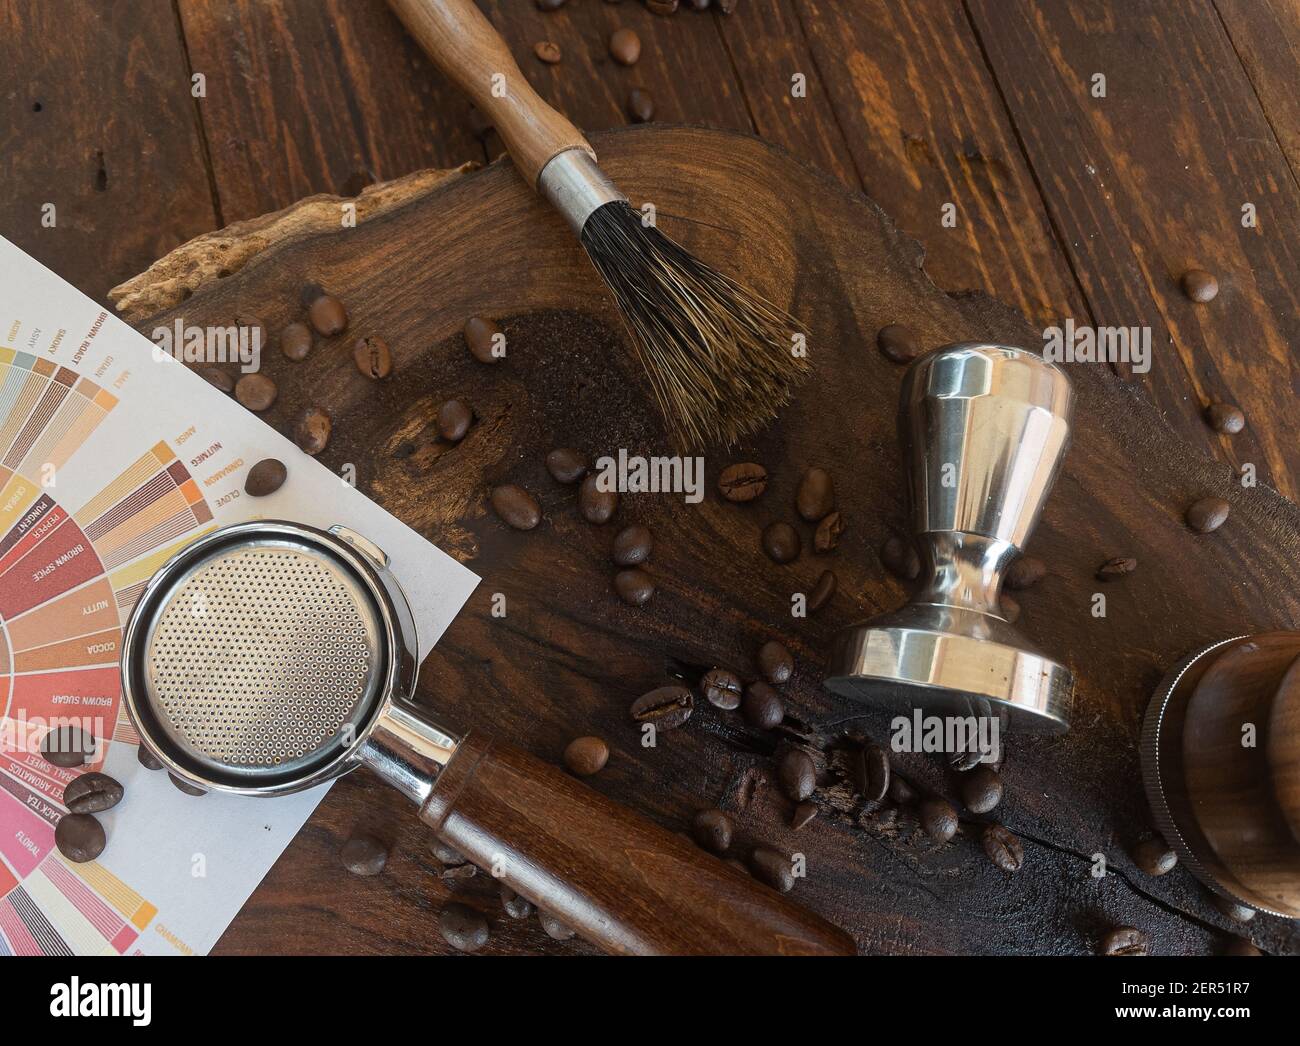 https://c8.alamy.com/comp/2ER51R7/barista-coffee-tools-tamper-distribution-leveling-tool-brushes-coffee-tasters-flavor-wheel-and-roasted-coffee-beans-on-wooden-board-2ER51R7.jpg